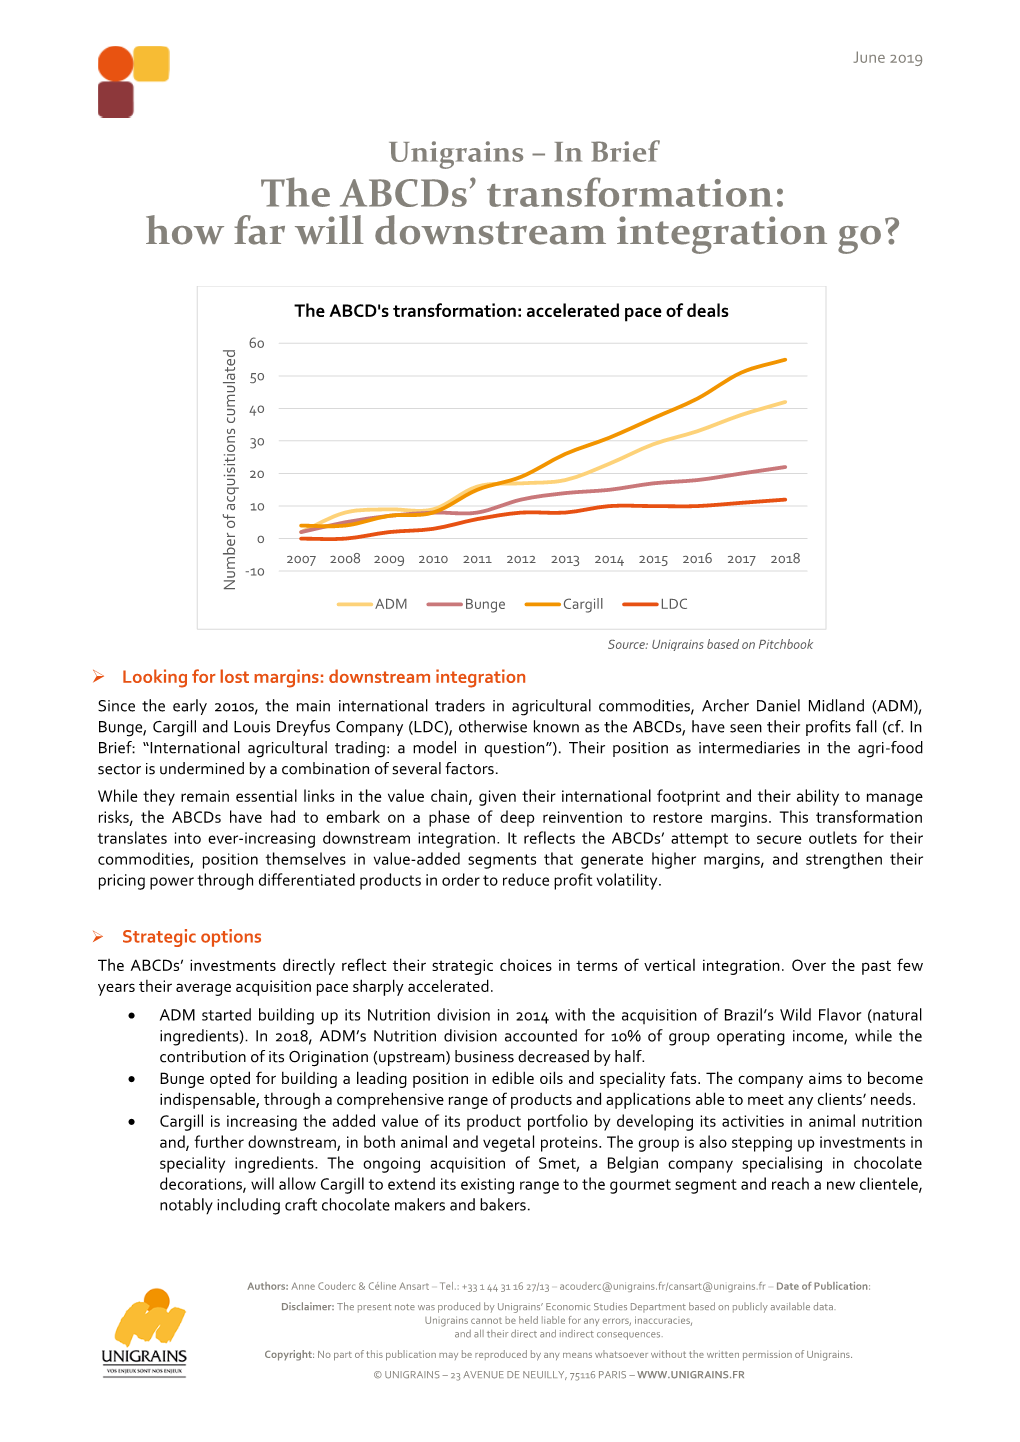 The Abcds' Transformation: How Far Will Downstream Integration